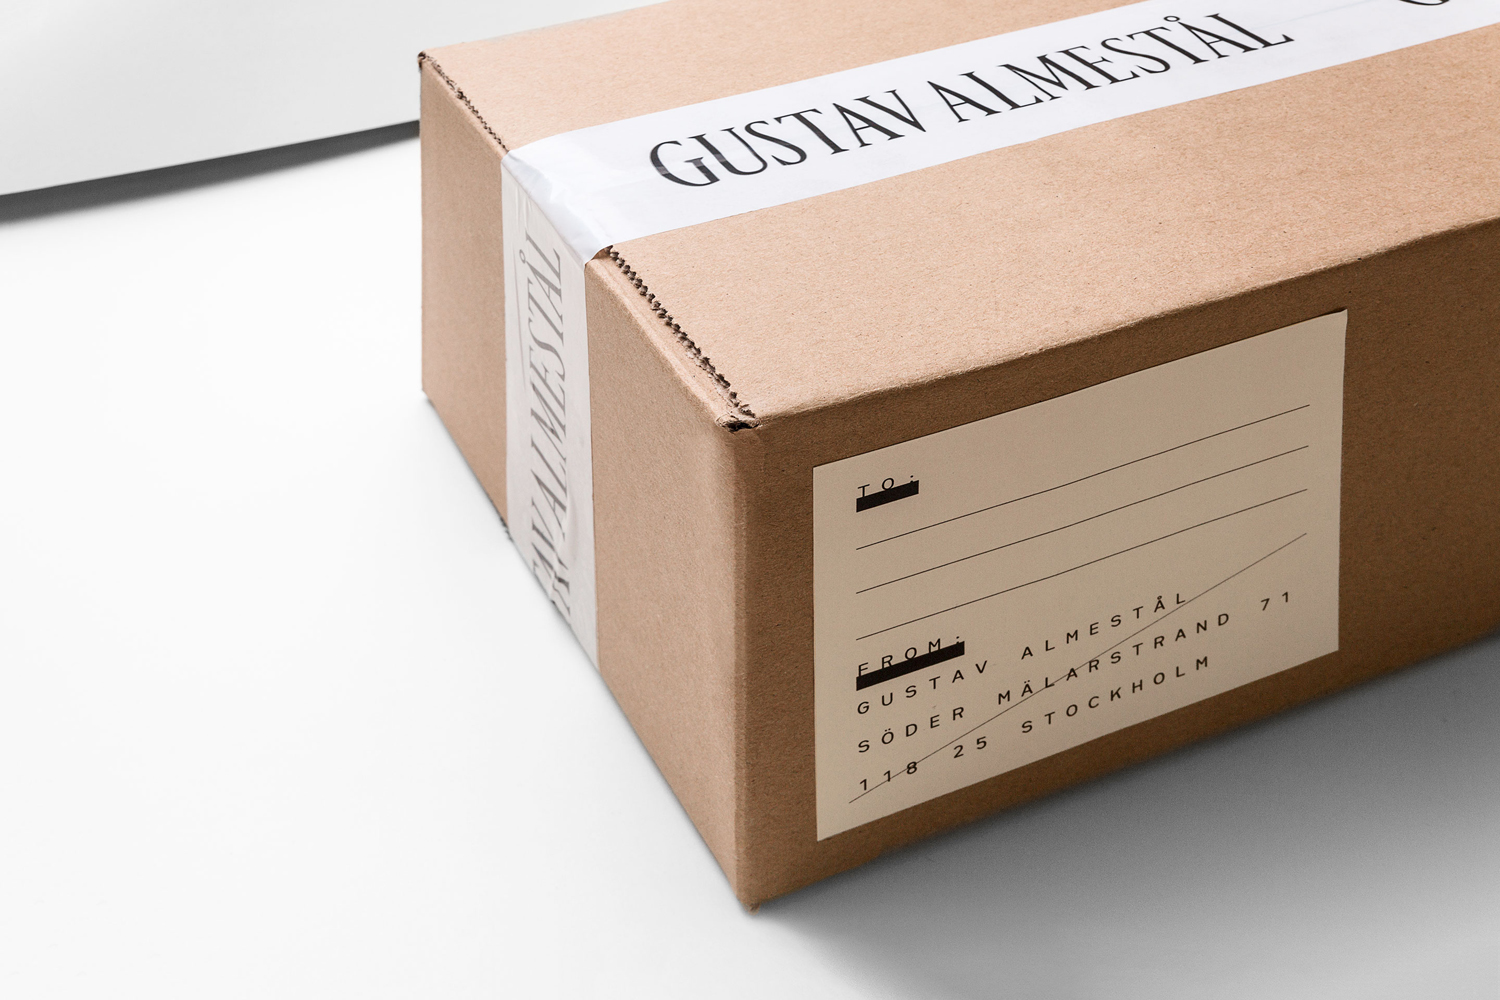 Brand identity, box tape and label designed by Bedow for Swedish still life and food photographer Gustav Almestål